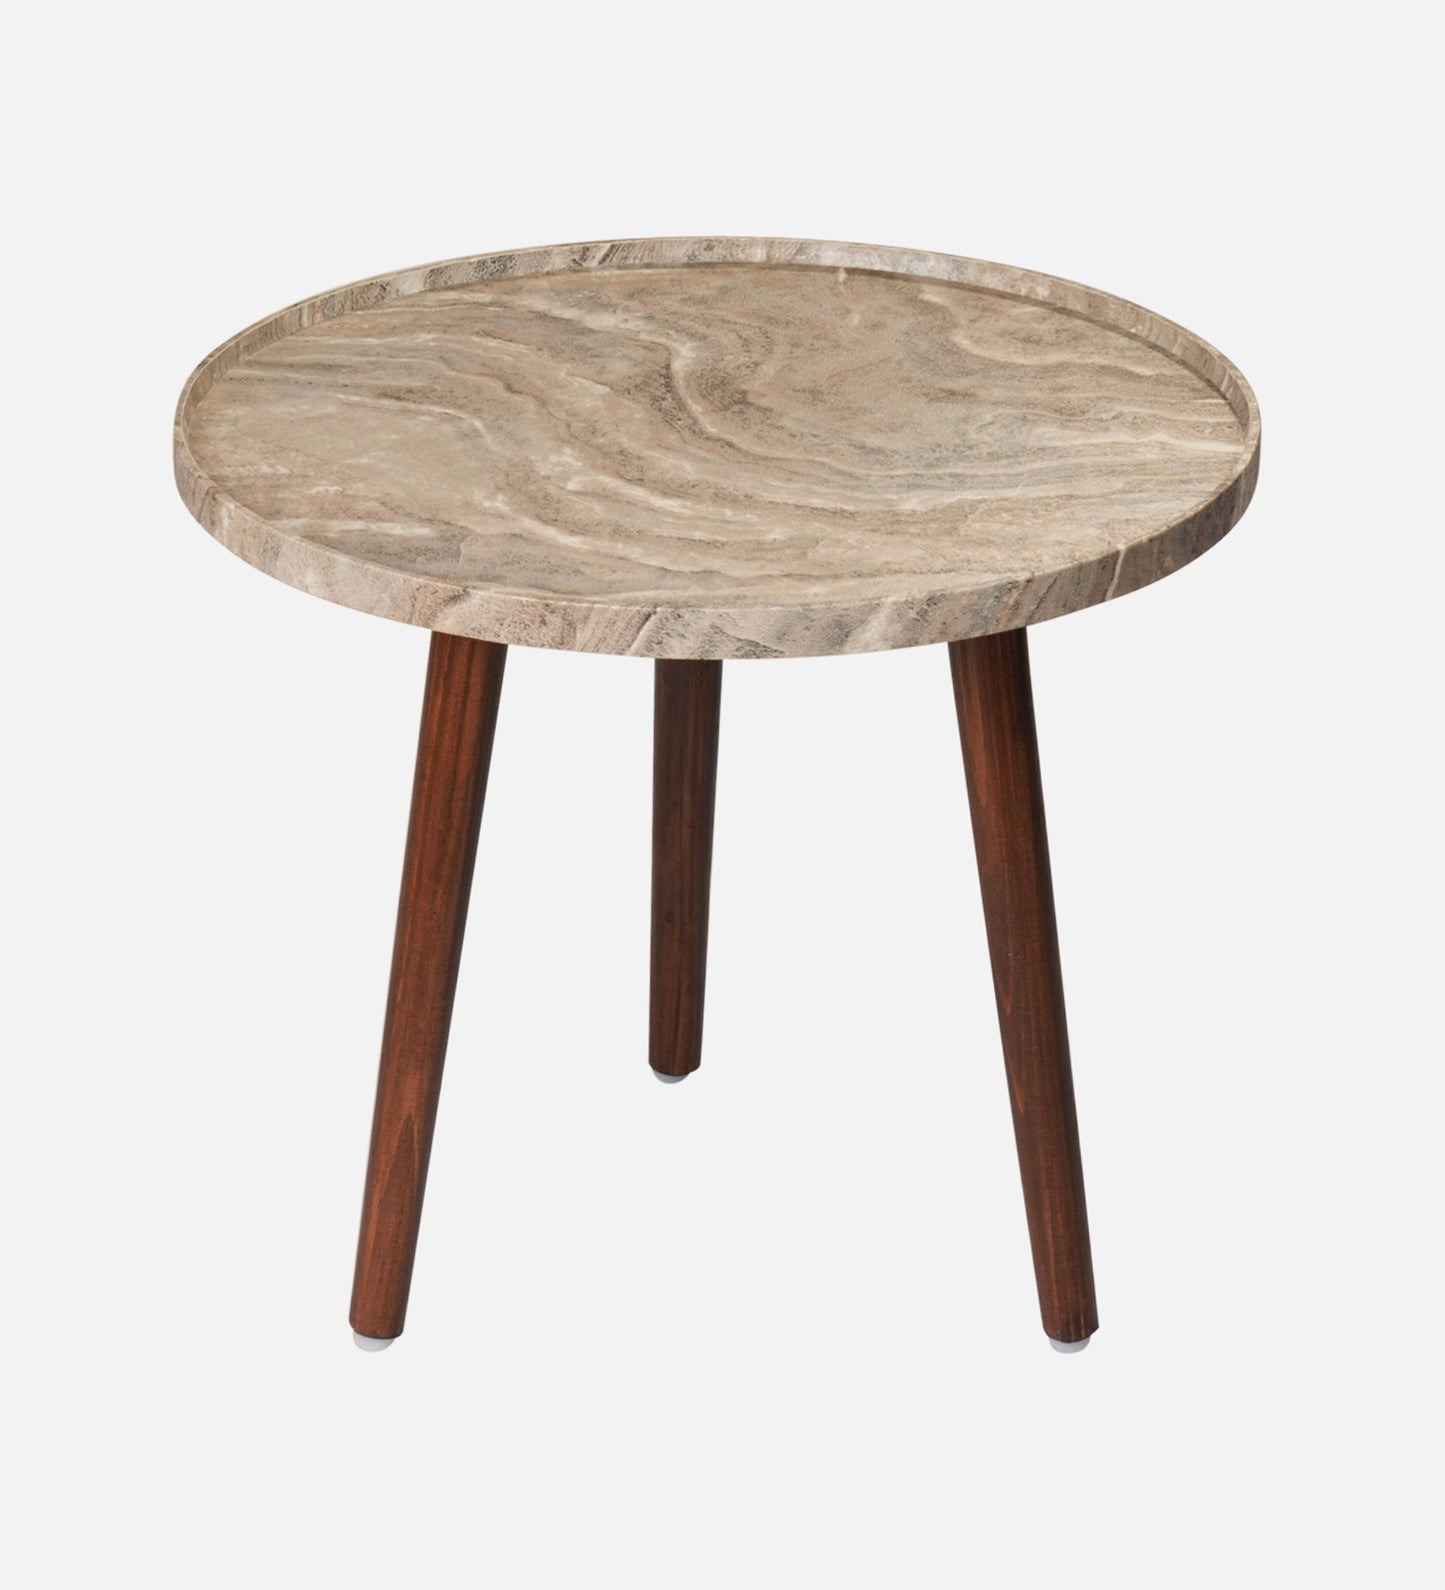 Oasis Inverse Round Nesting Tables with Wooden Legs, Side Tables, Wooden Tables, Living Room Decor by A Tiny Mistake